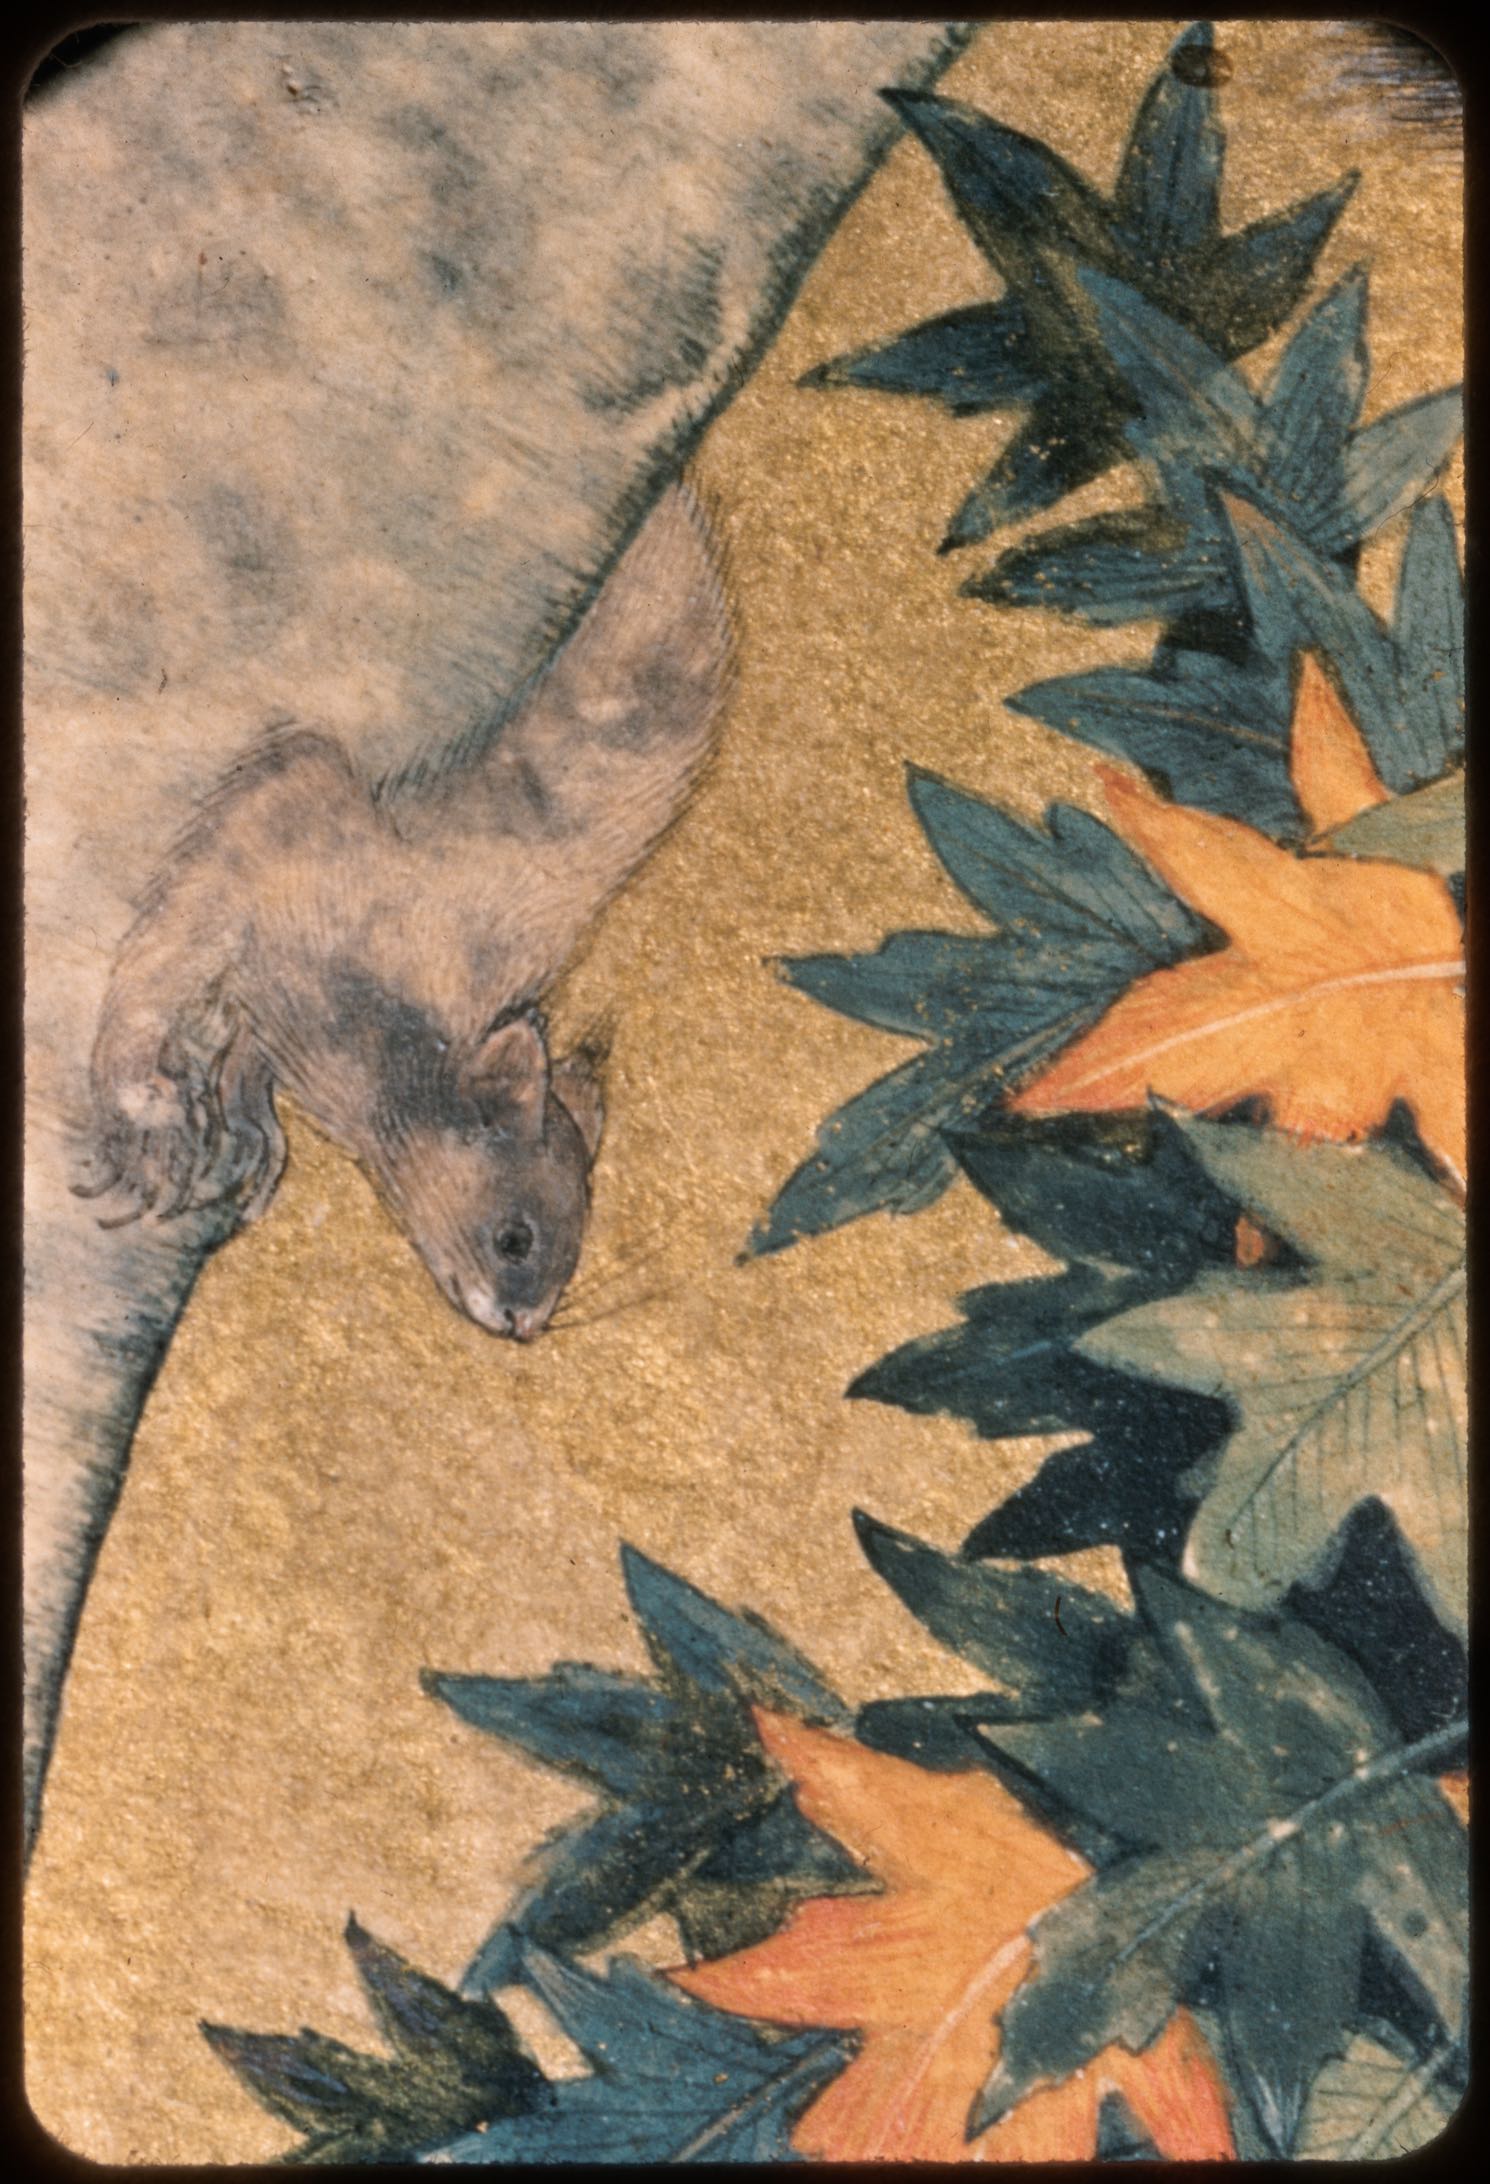 Detail of squirrel with leaves, Squirrels in a Plane Tree (British Library, Johnson Album 1/30)